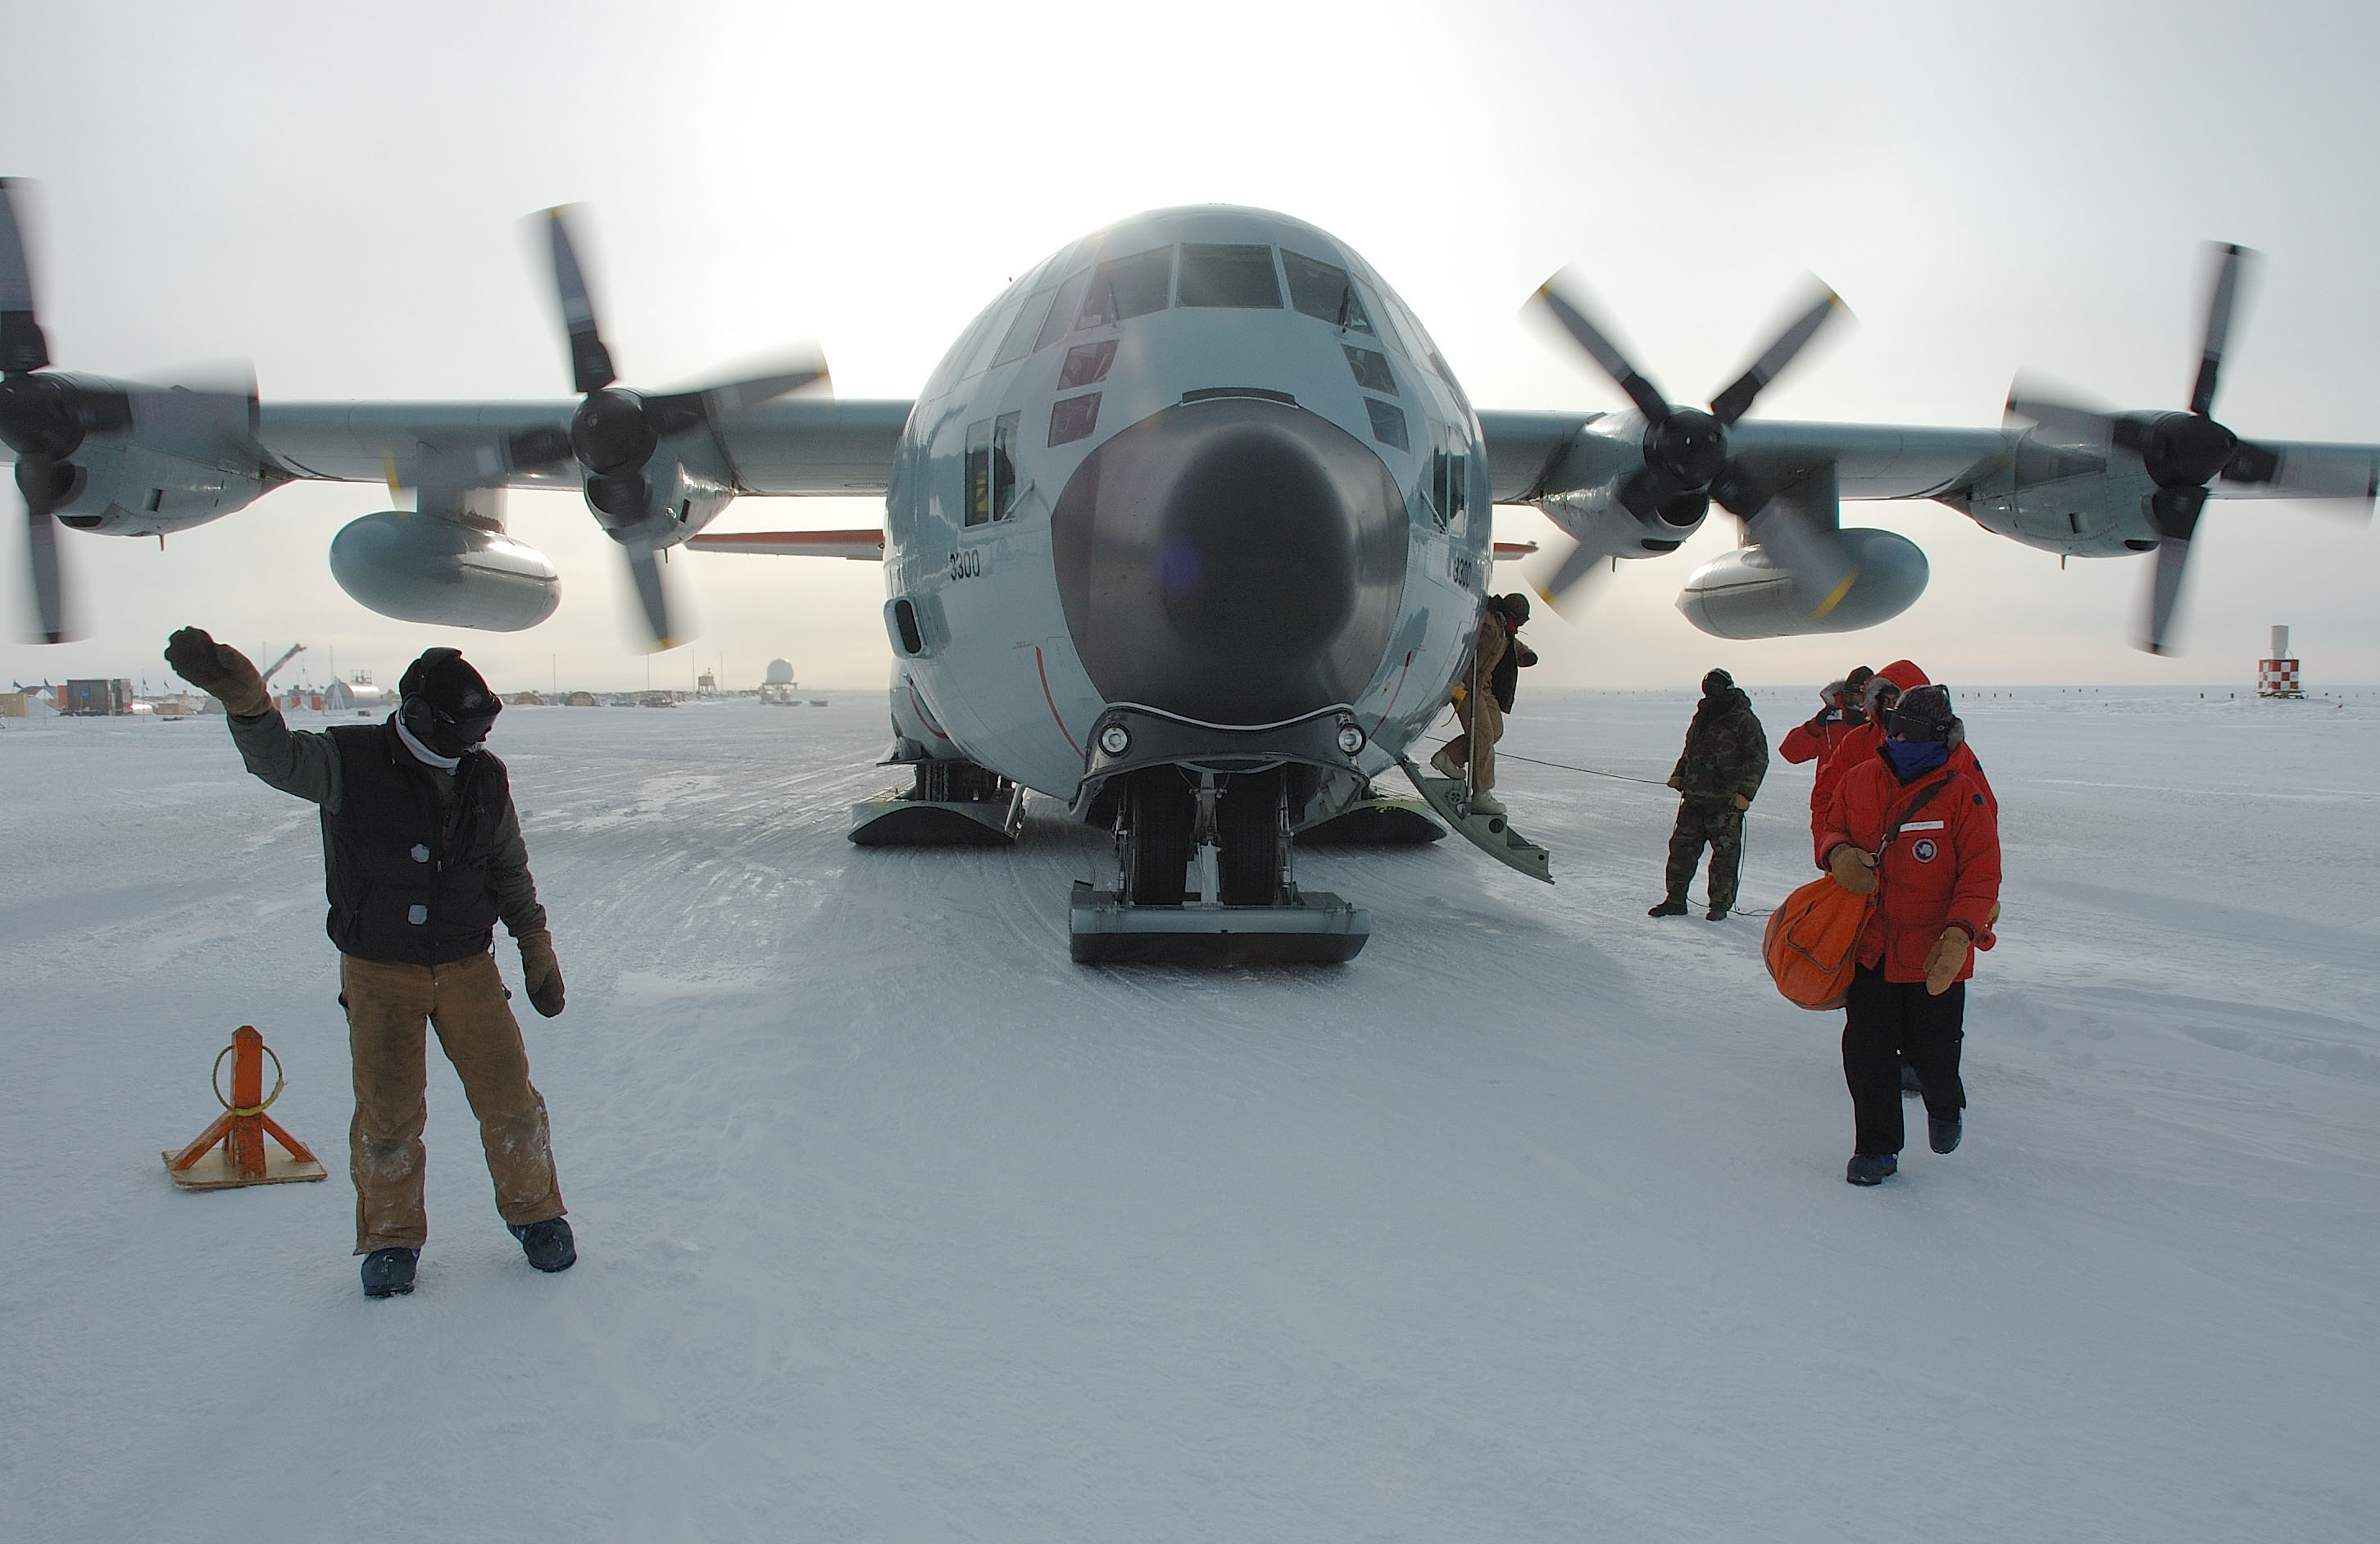 Arriving at the south pole - Glen Grant